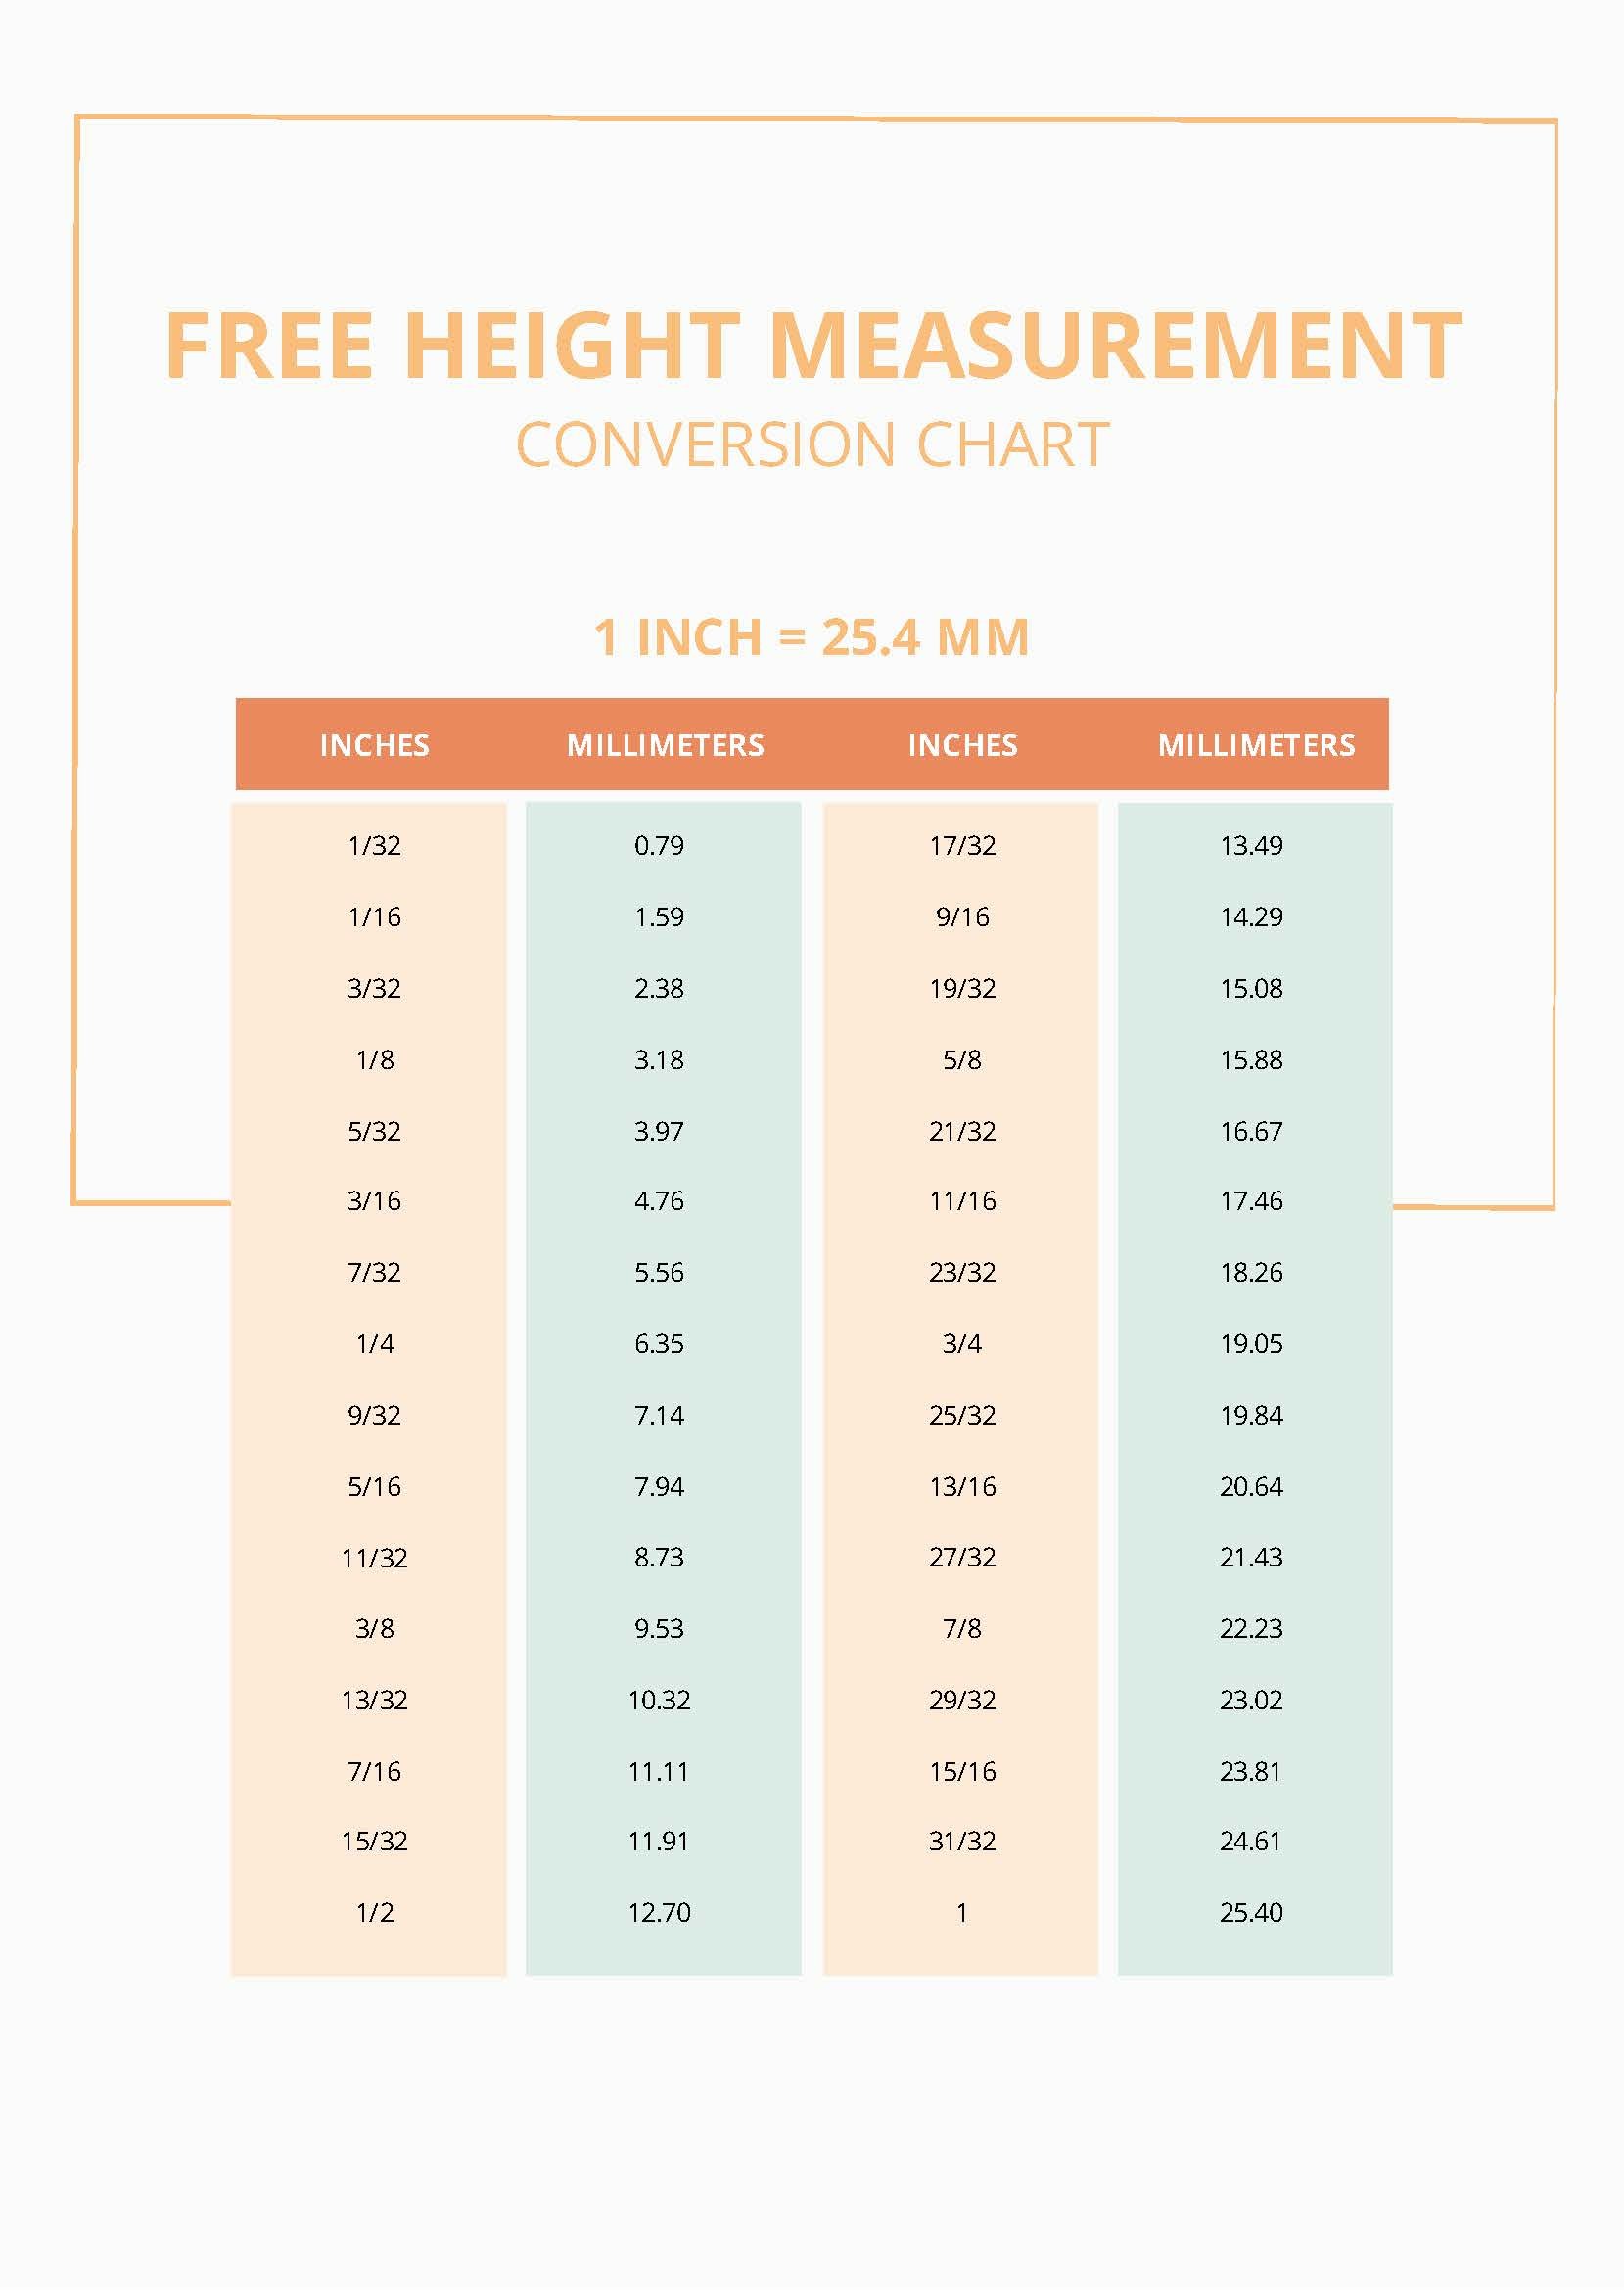 Free Height Measurement Conversion Chart - Download in PDF